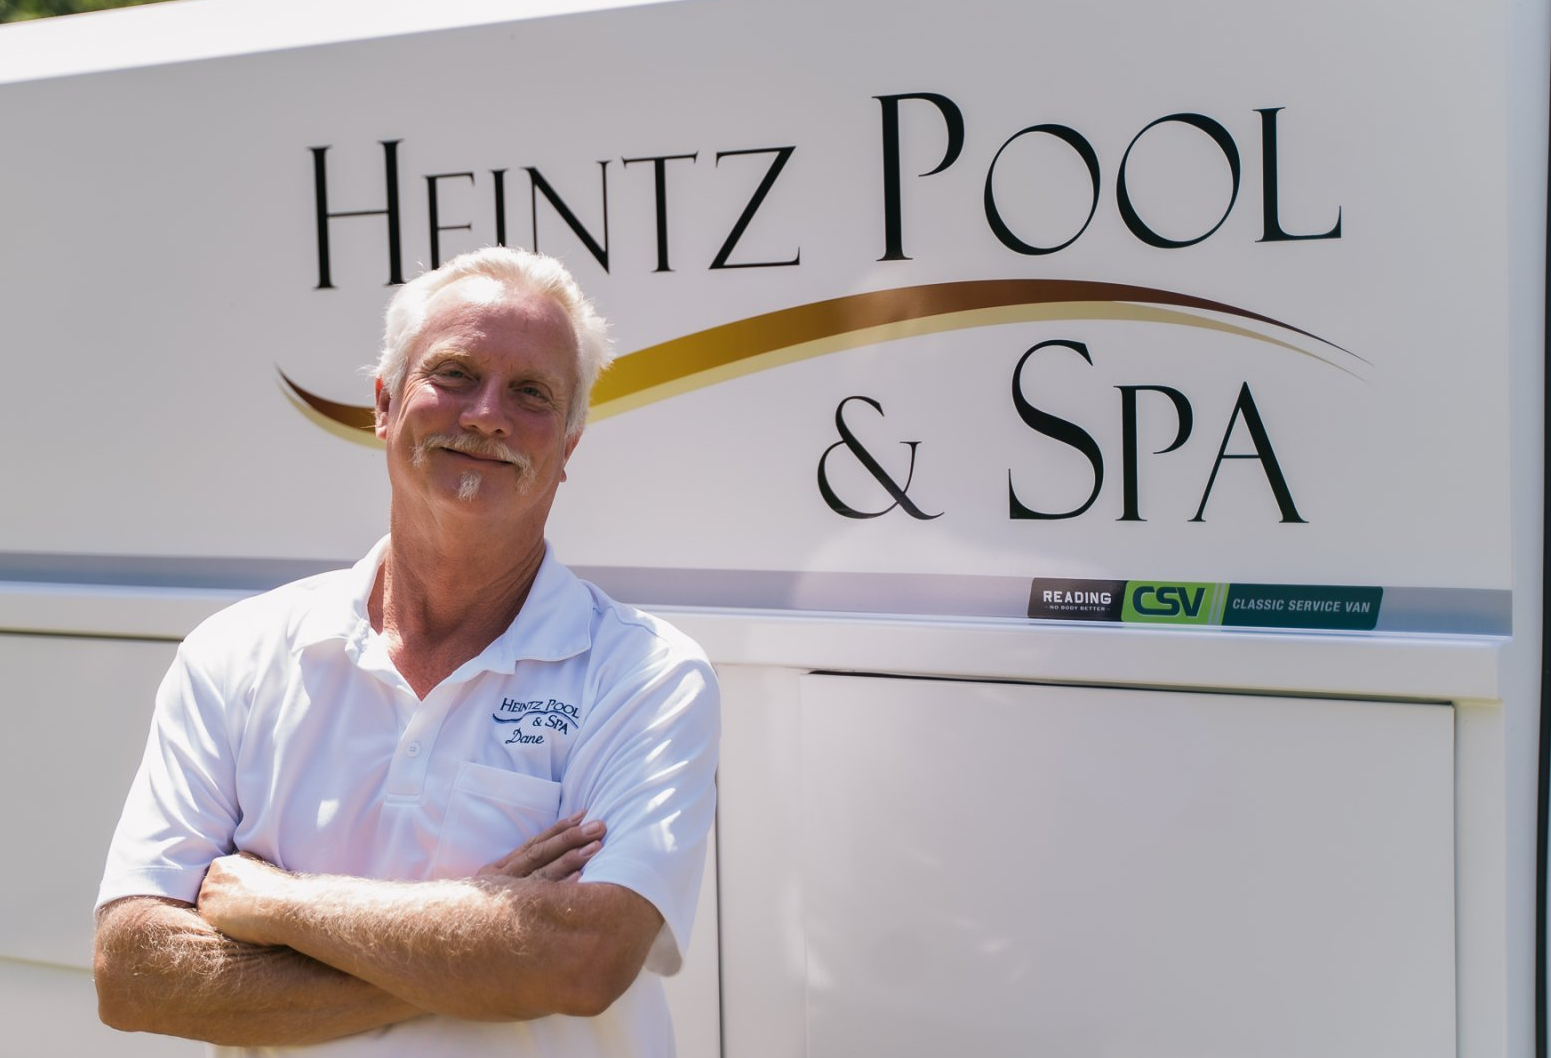 Man in white Heintz Pool & Spa uniform standing with the company truck behind him